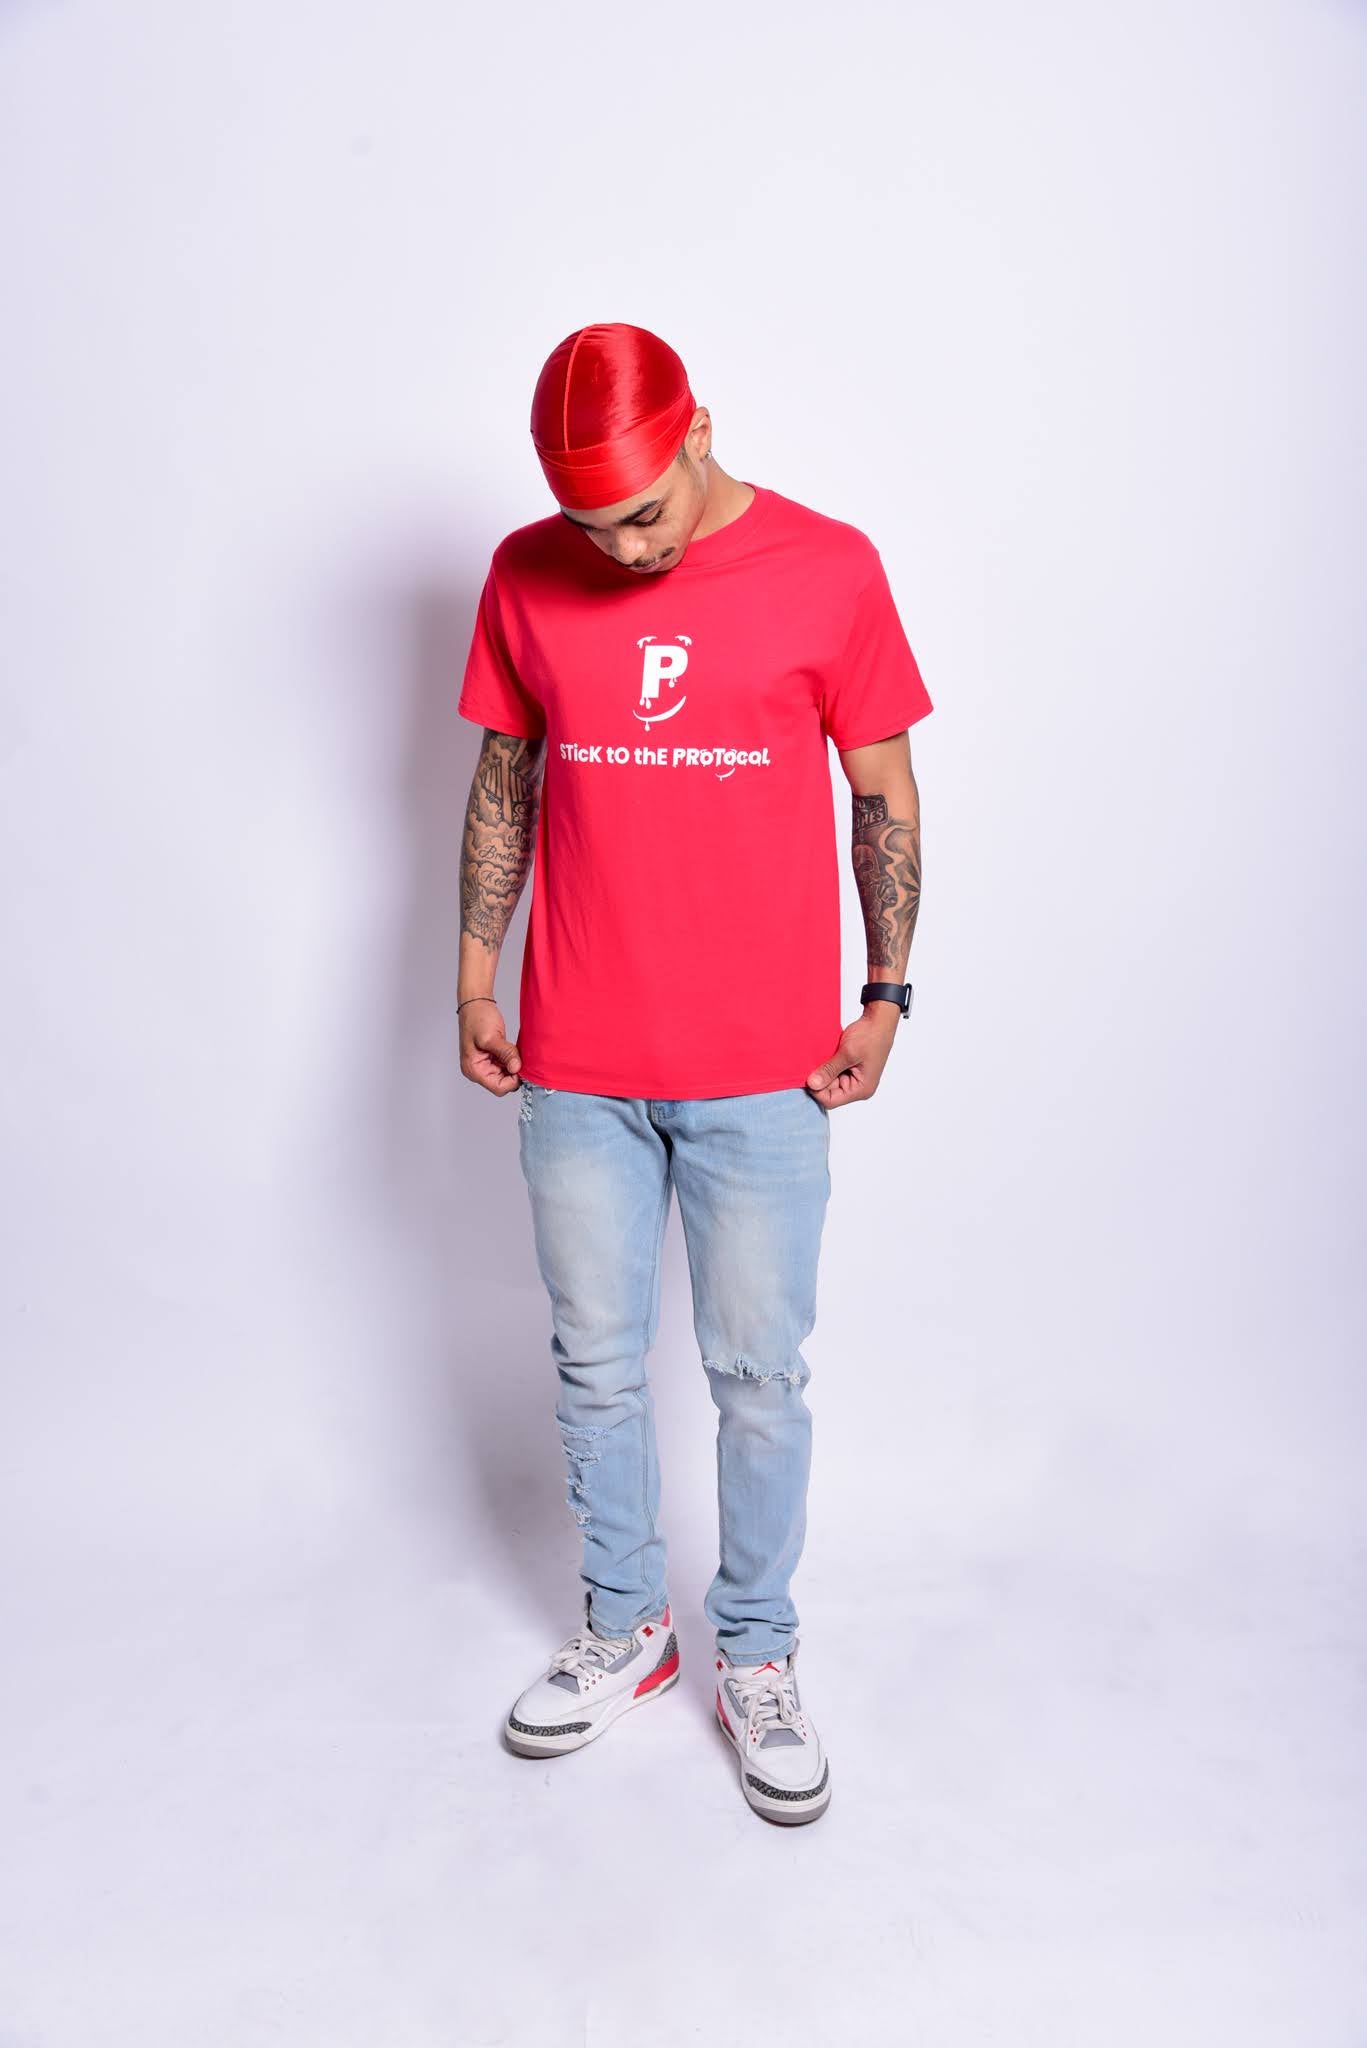 Red PRoTocoL tee